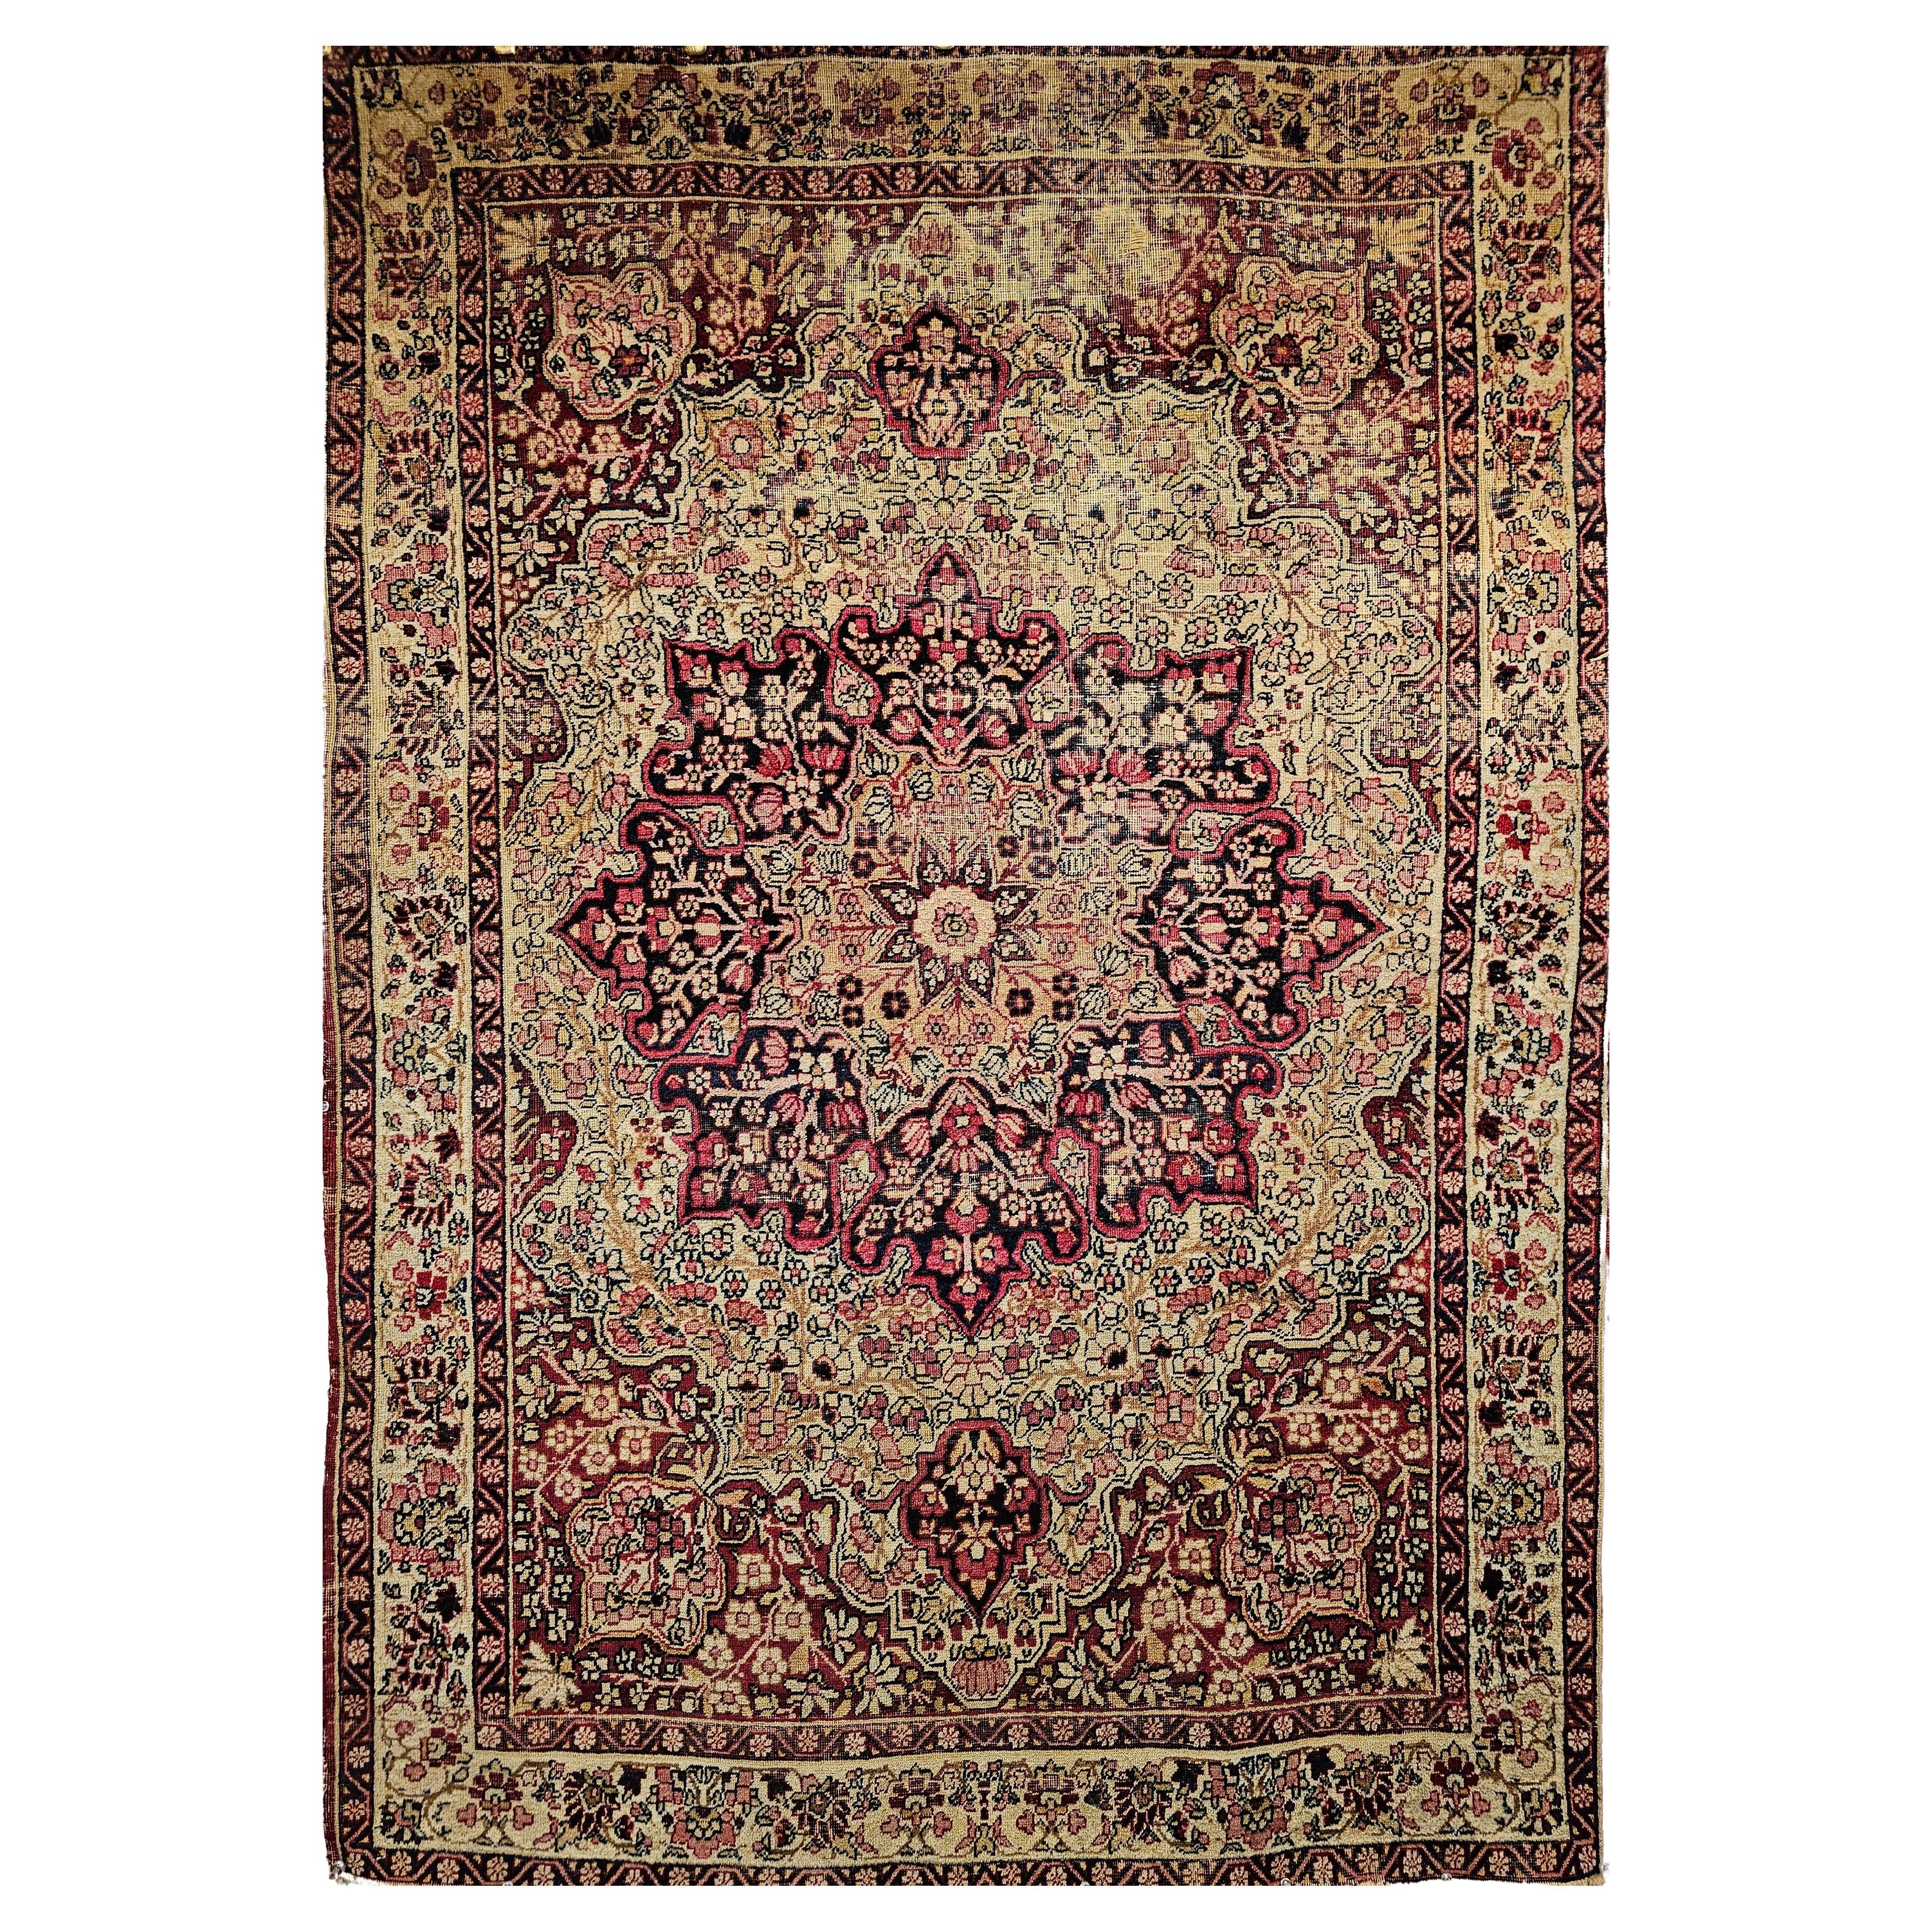 19th Century Persian Kerman Lavar in Floral Pattern in Red, Pale Yellow, Black